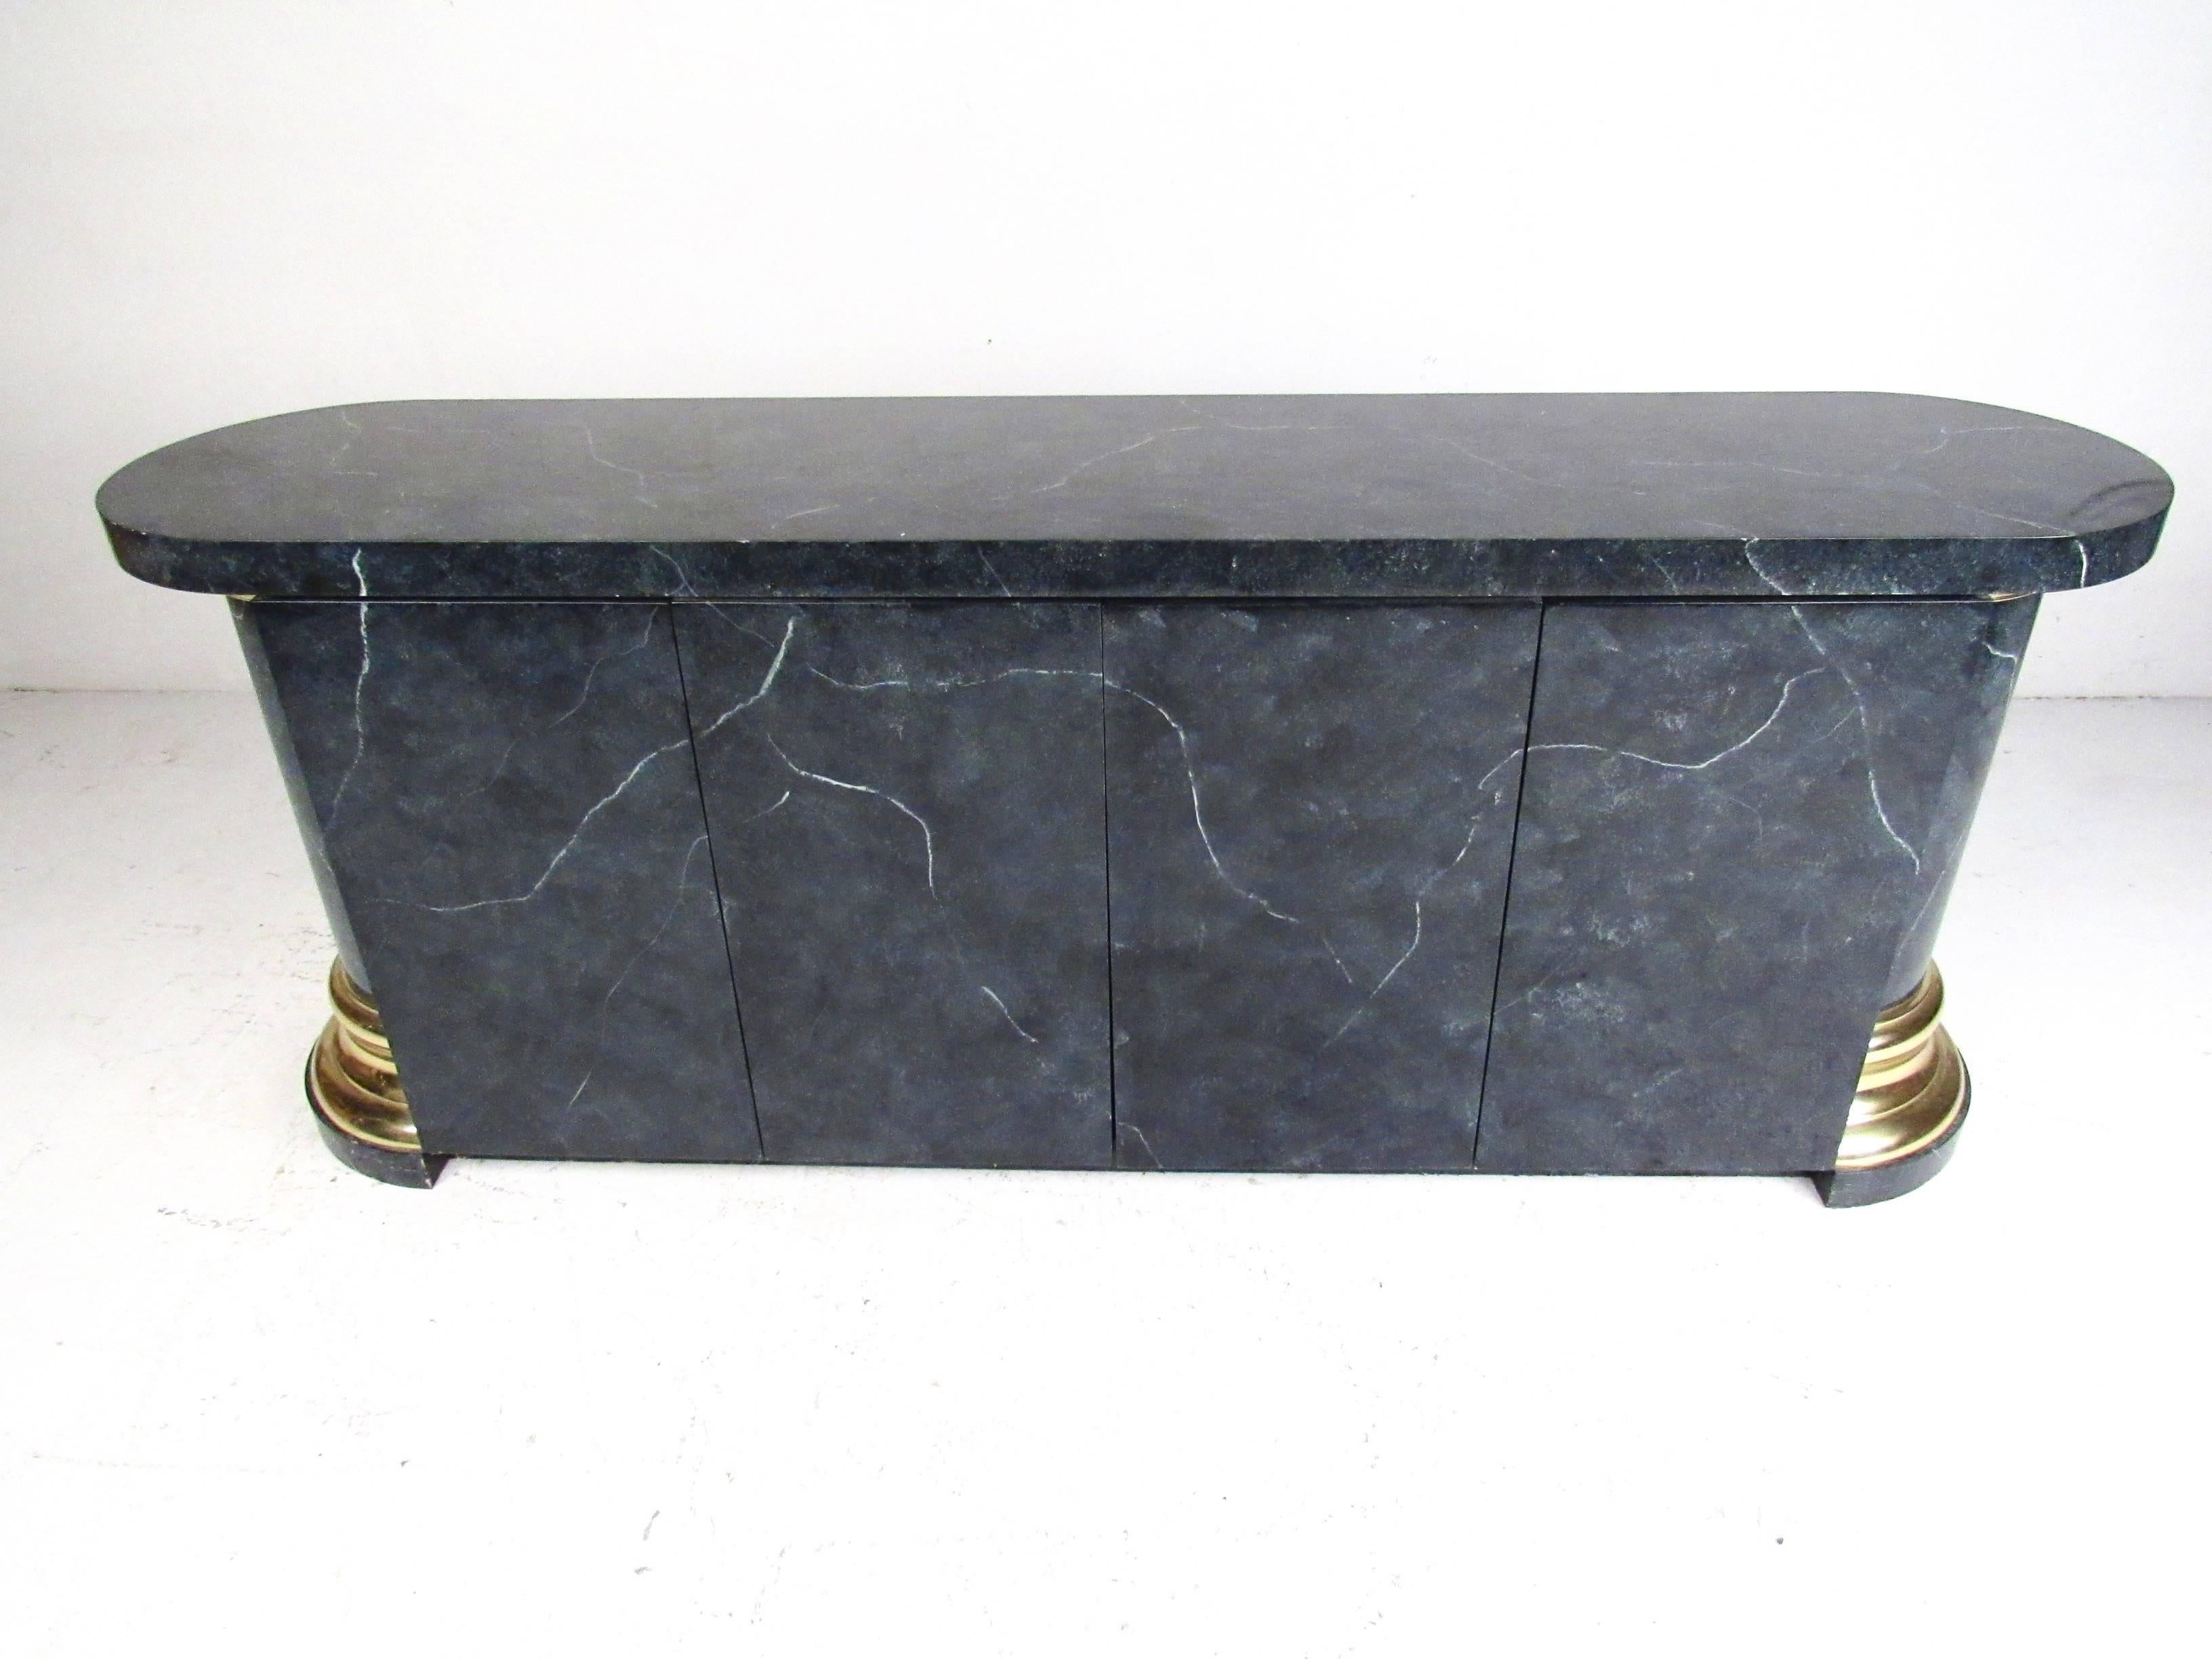 This stylish vintage modern sideboard features deco style design and makes a striking addition to dining room or showroom storage. Faux marbled finish in swirling blue/black palette is complimented by brass plated trim and unique column style sides.